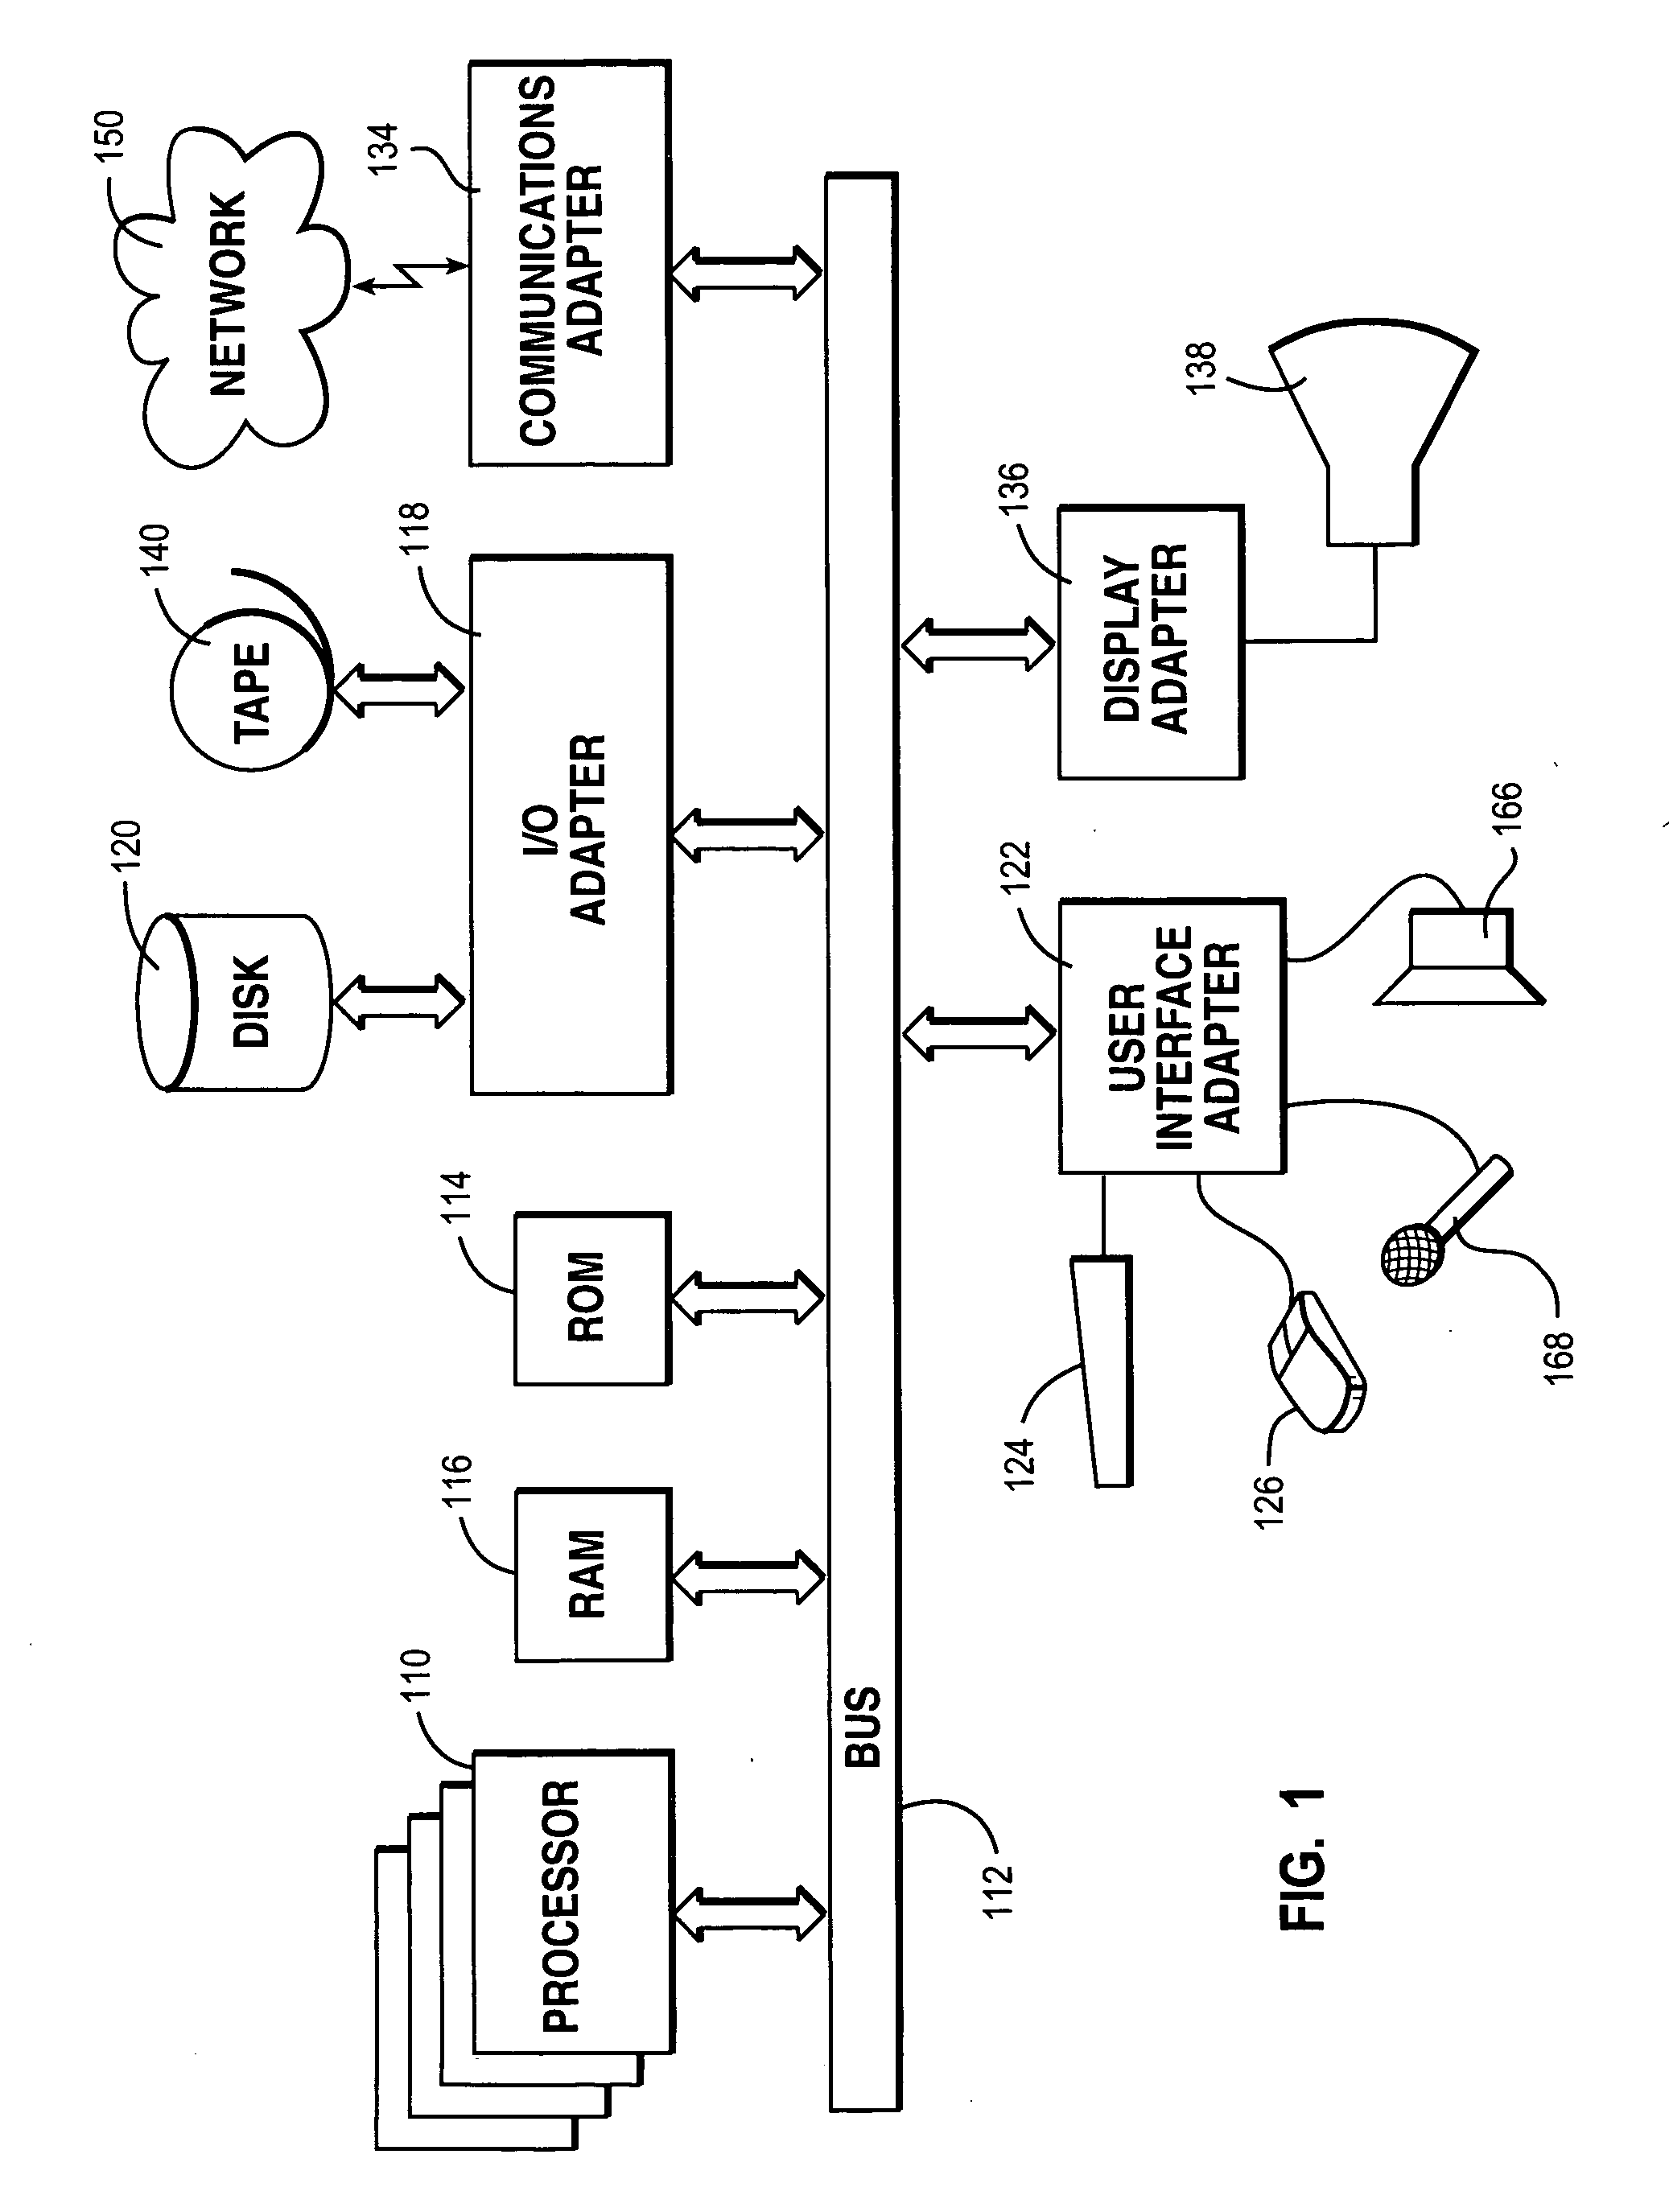 Method and system of ordering provisioning request execution based on service level agreement and customer entitlement